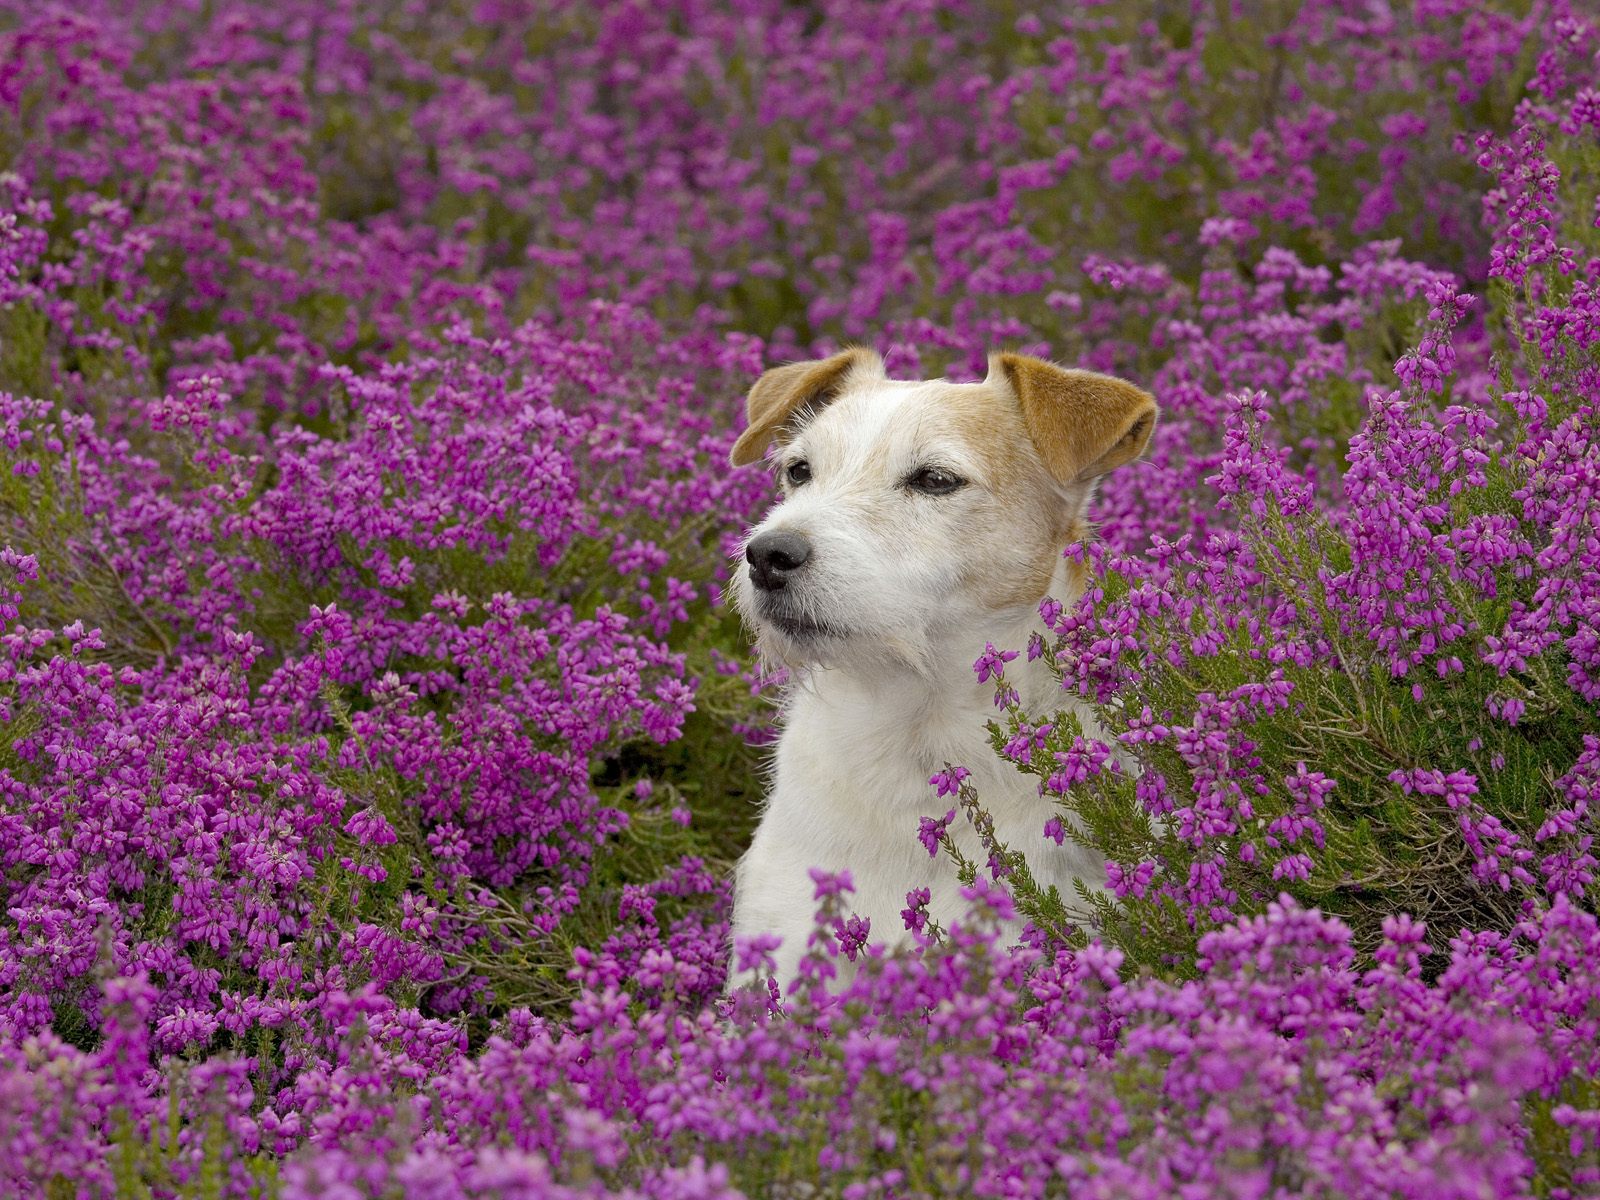 dog and flowers